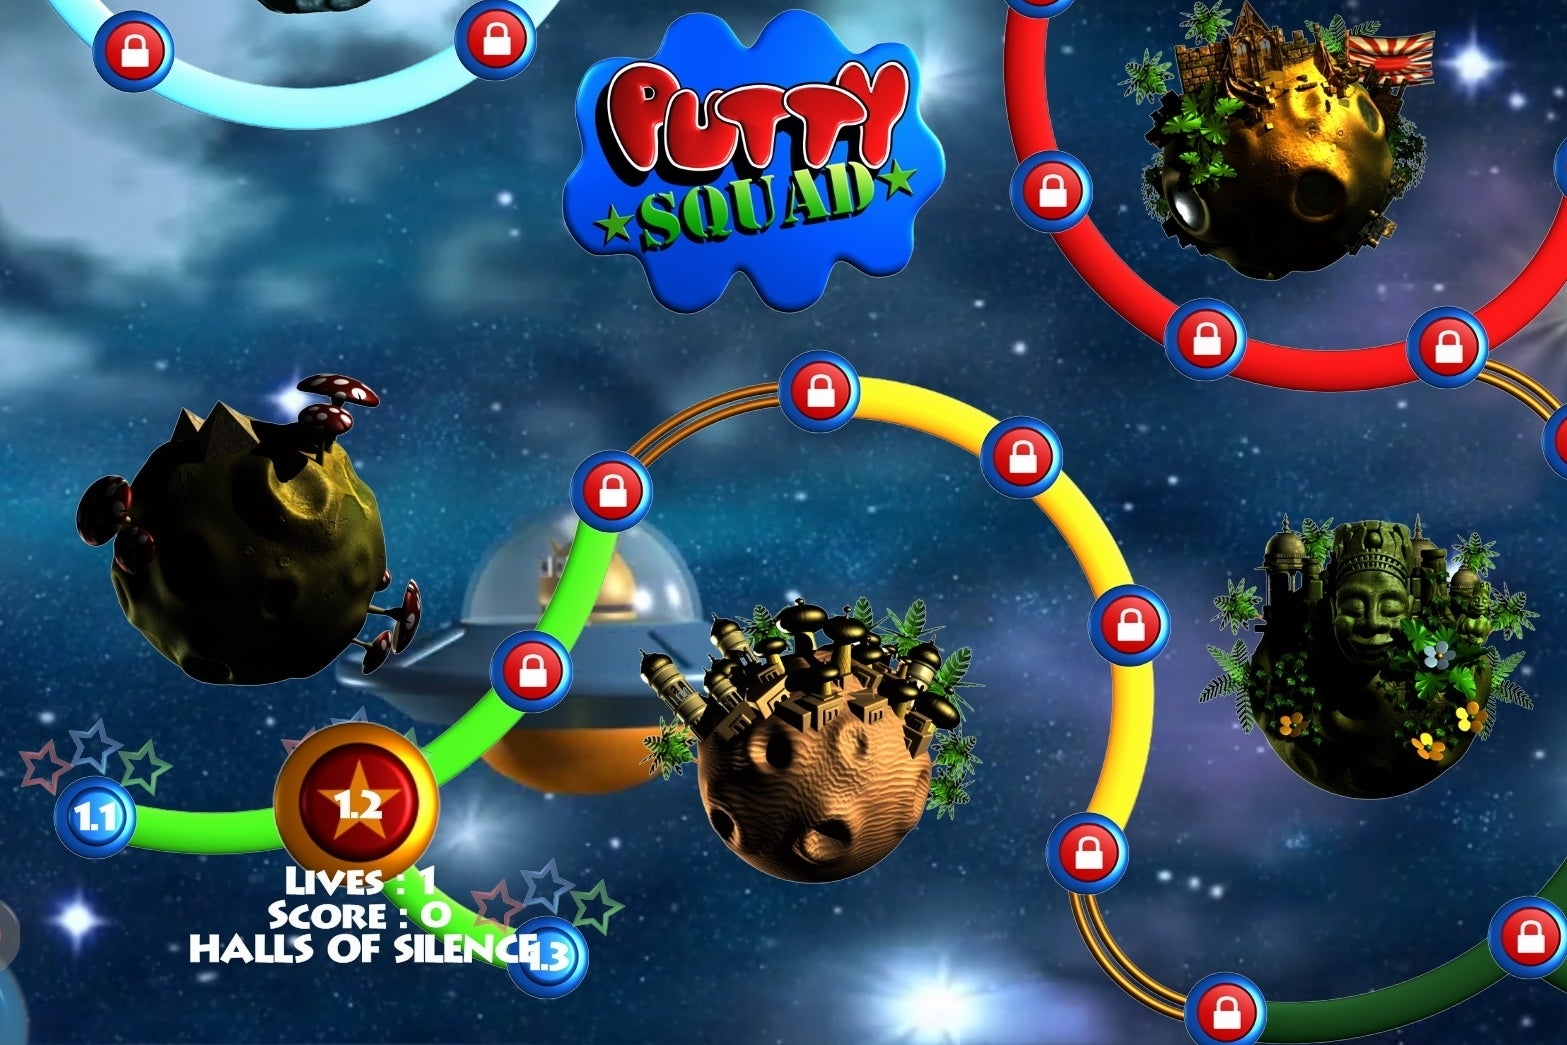 Image for Putty Squad and The Pinball Arcade are PS4 launch titles